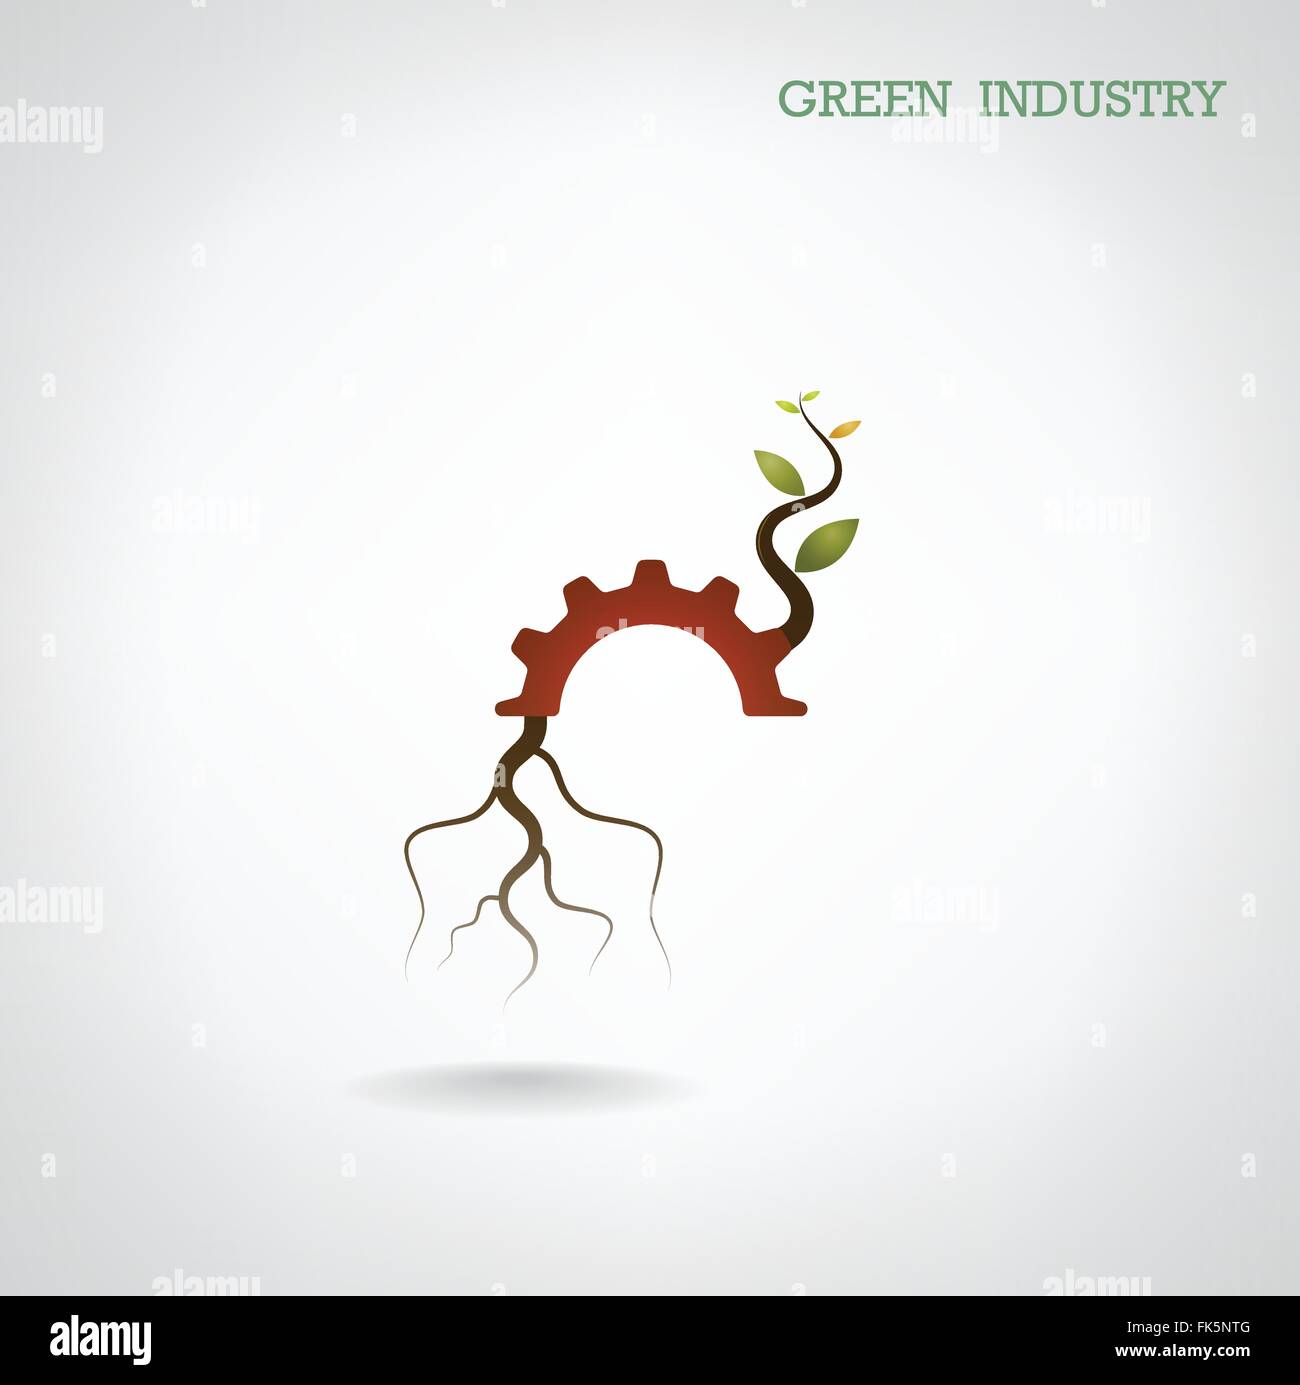 Green industry concept. Small plant and gear symbol, business and green idea, education concept. Vector illustration. Stock Vector